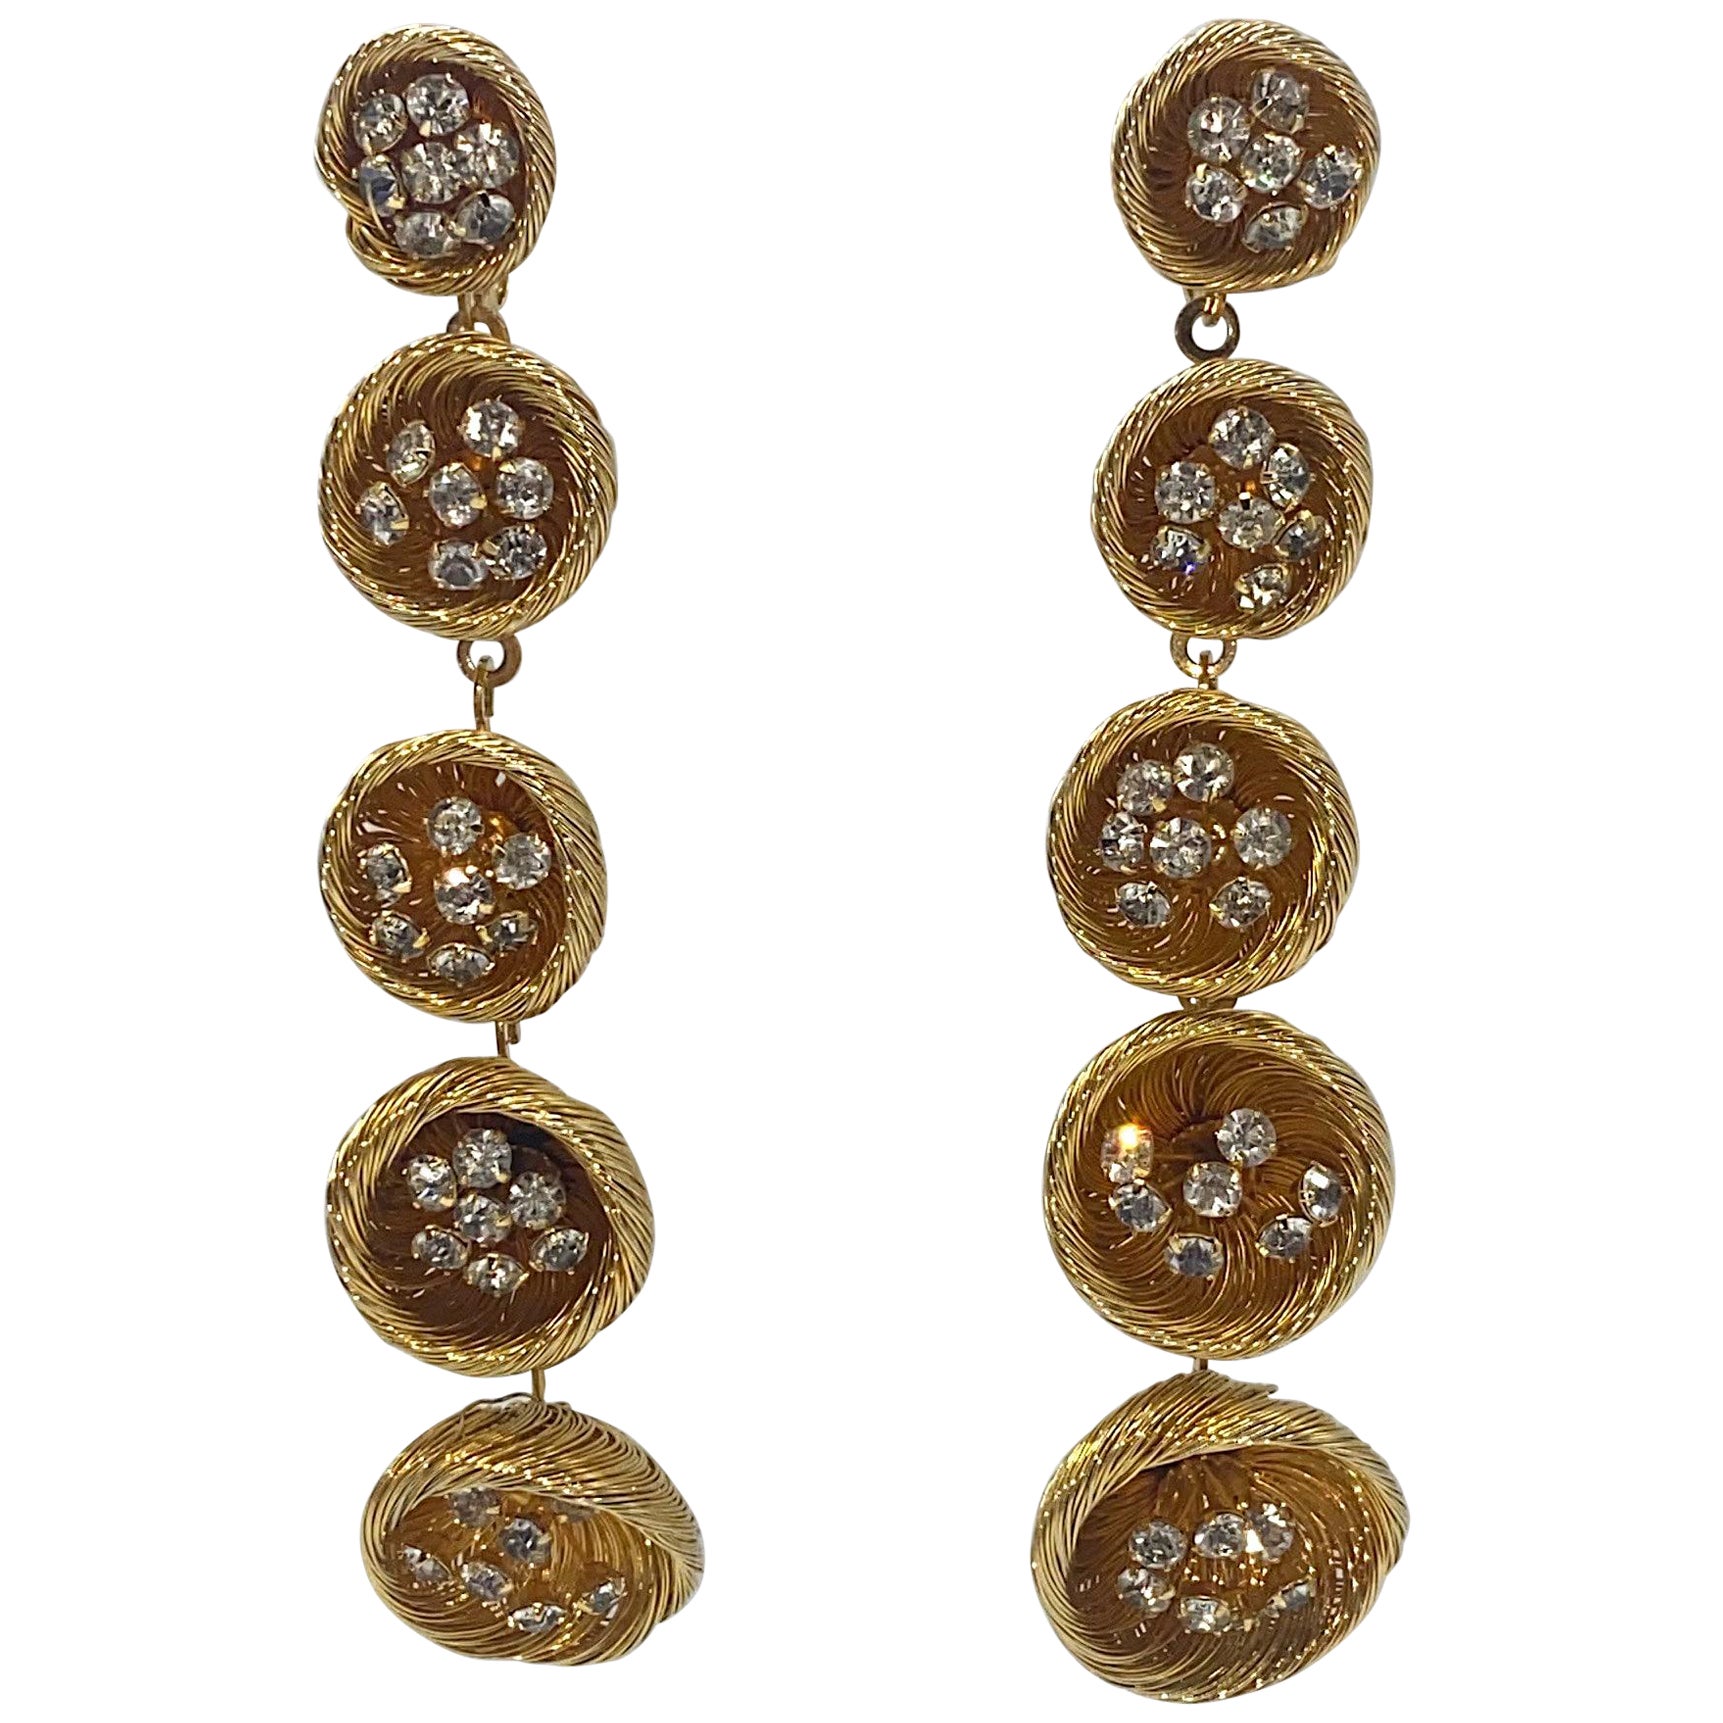 Spectacular 1960S Gold and Rhinestone Mod Long Earrings